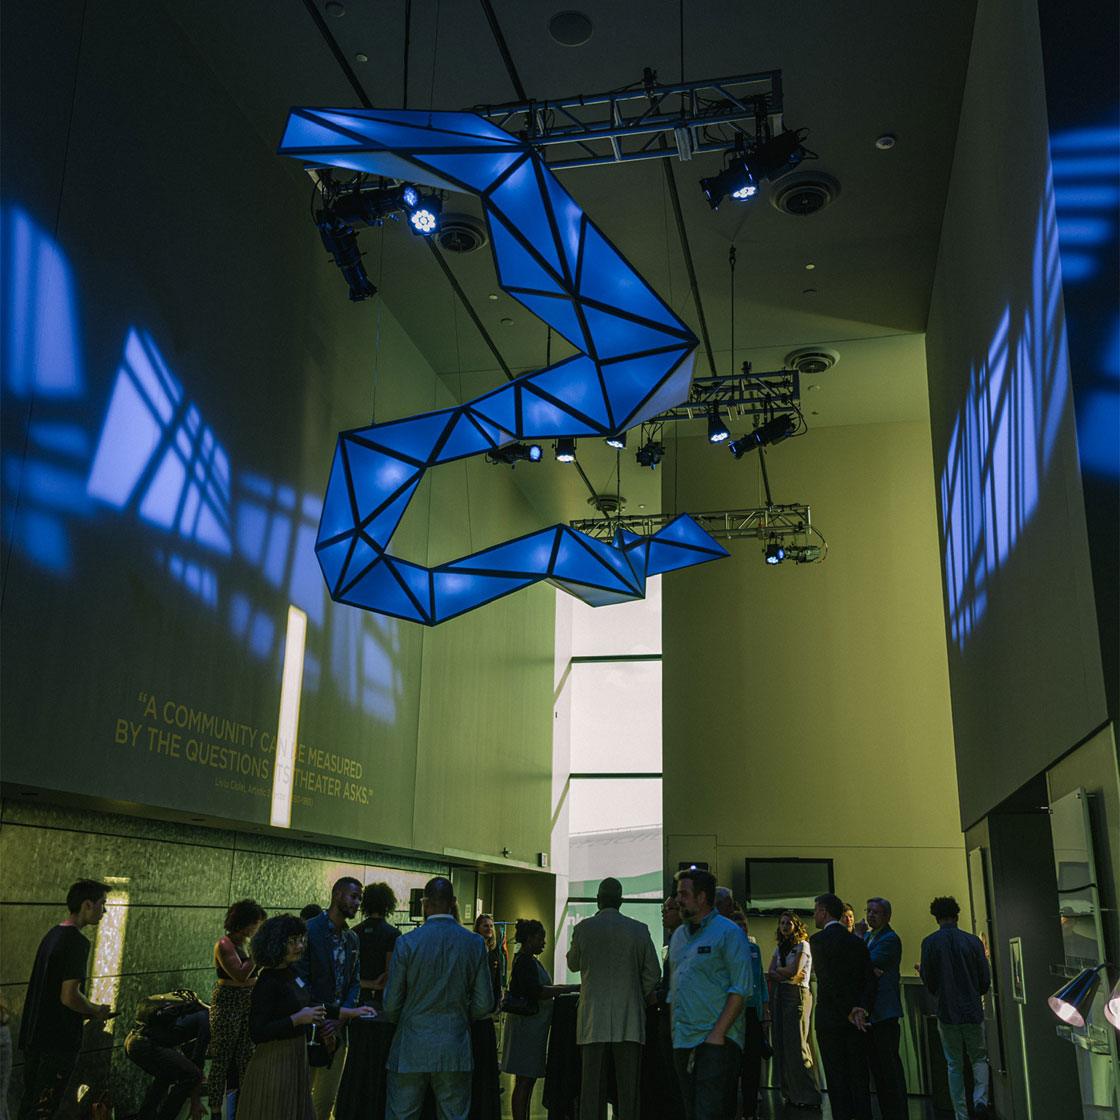 A large scale sculptural light based art installation with people standing underneath